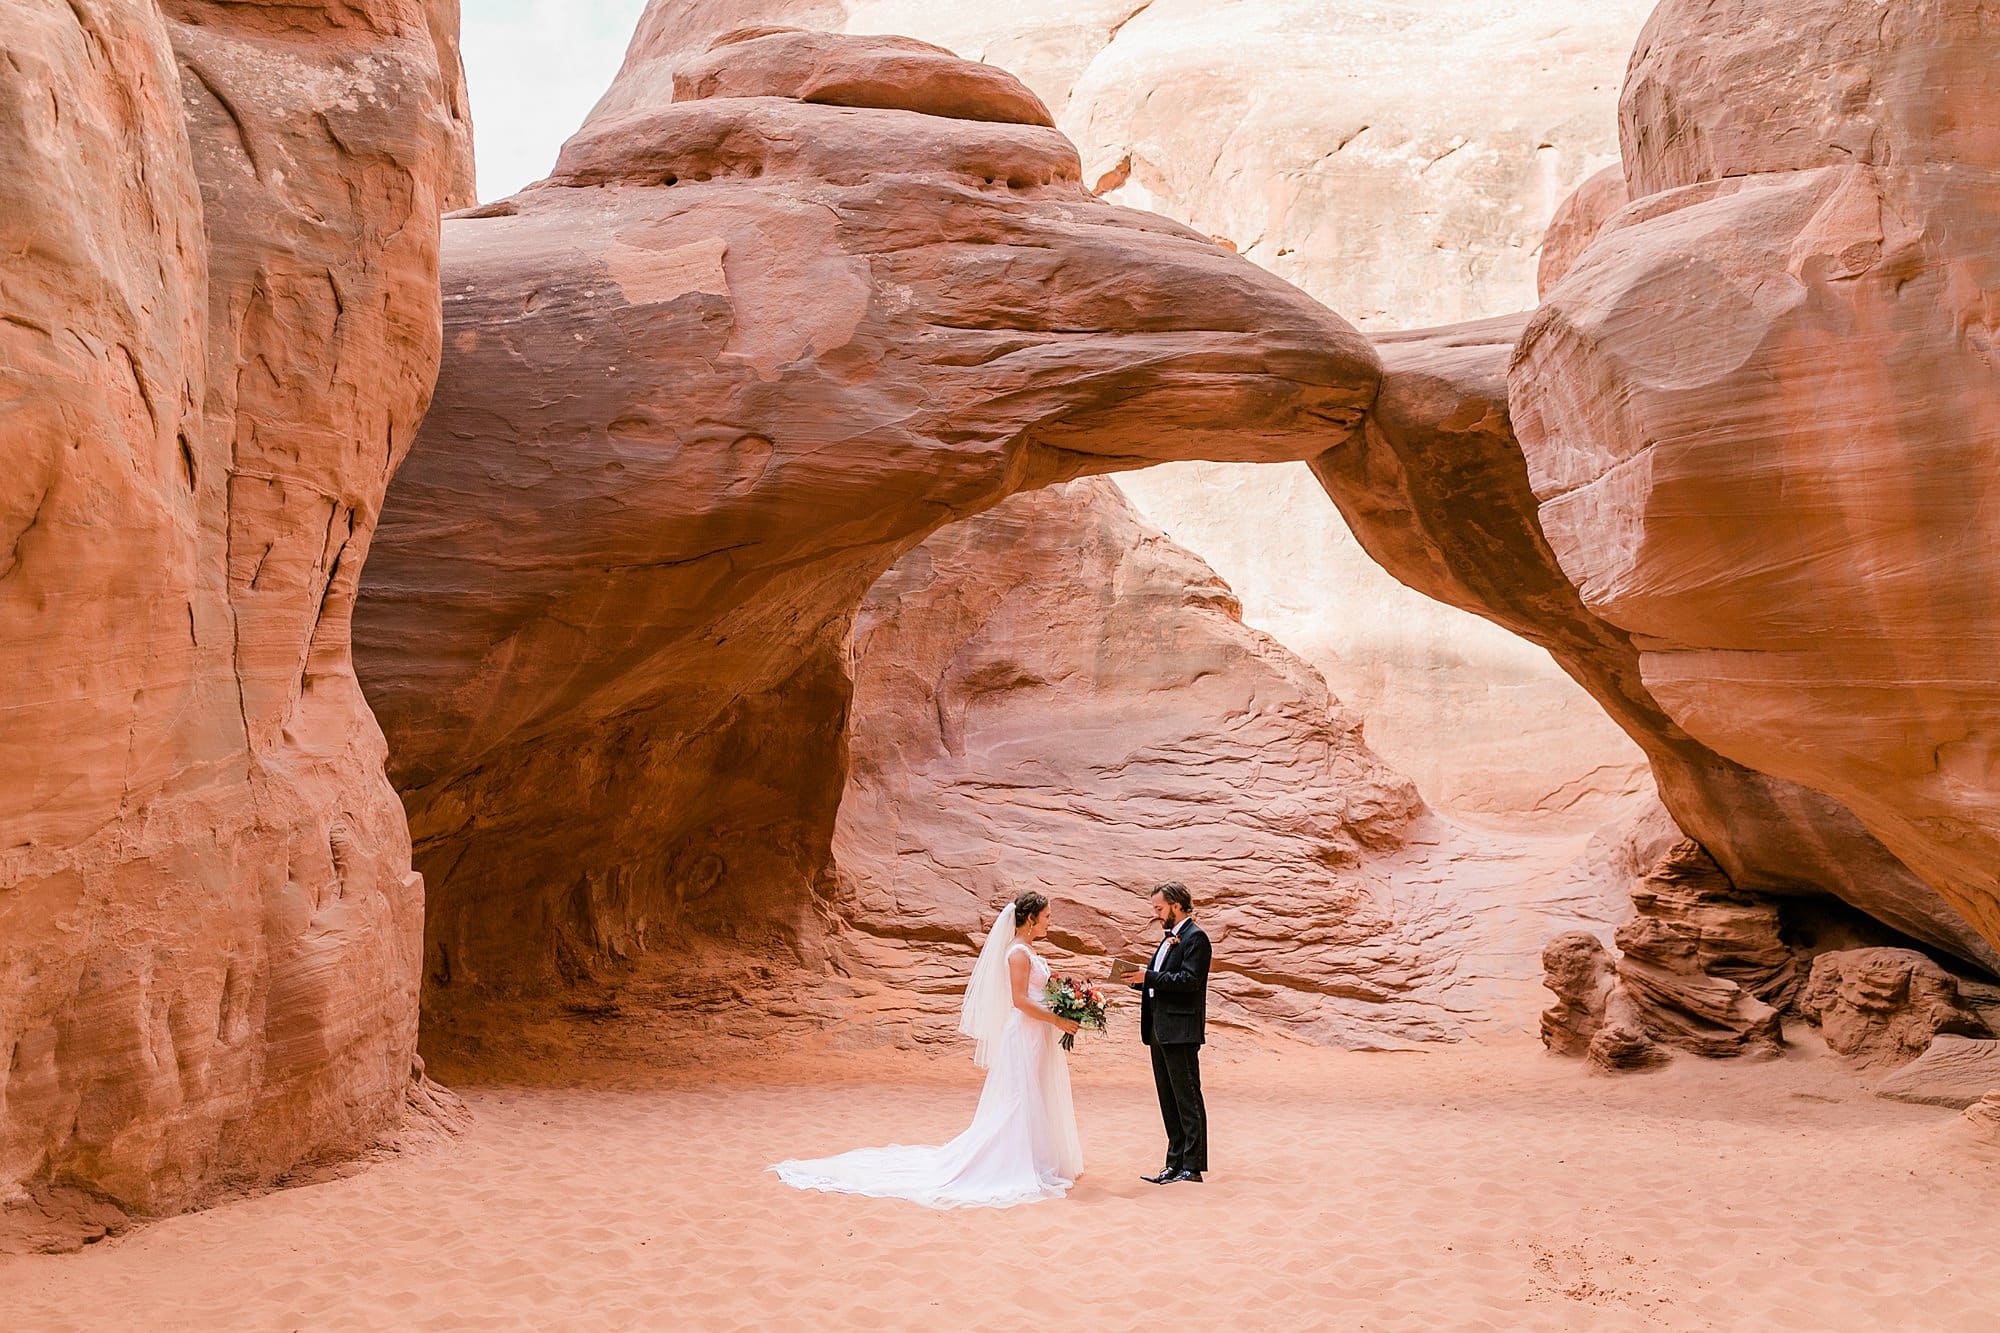 A couple says their vows while they elope in Moab at Sand Dune Arch.